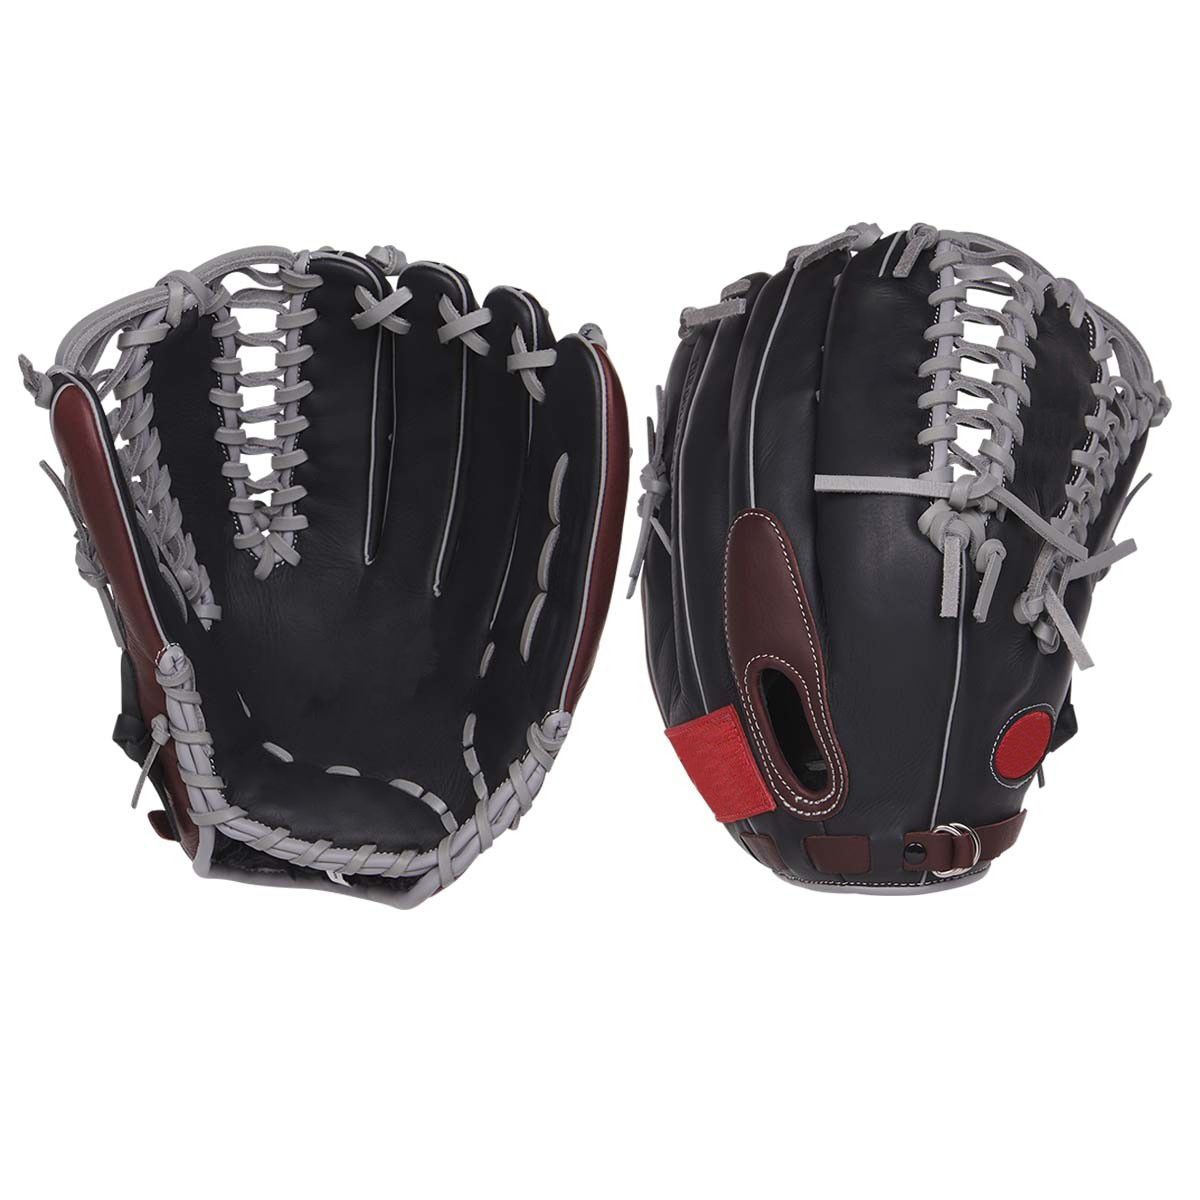 12.75" Soft durable all-leather right hand throw baseball gloves